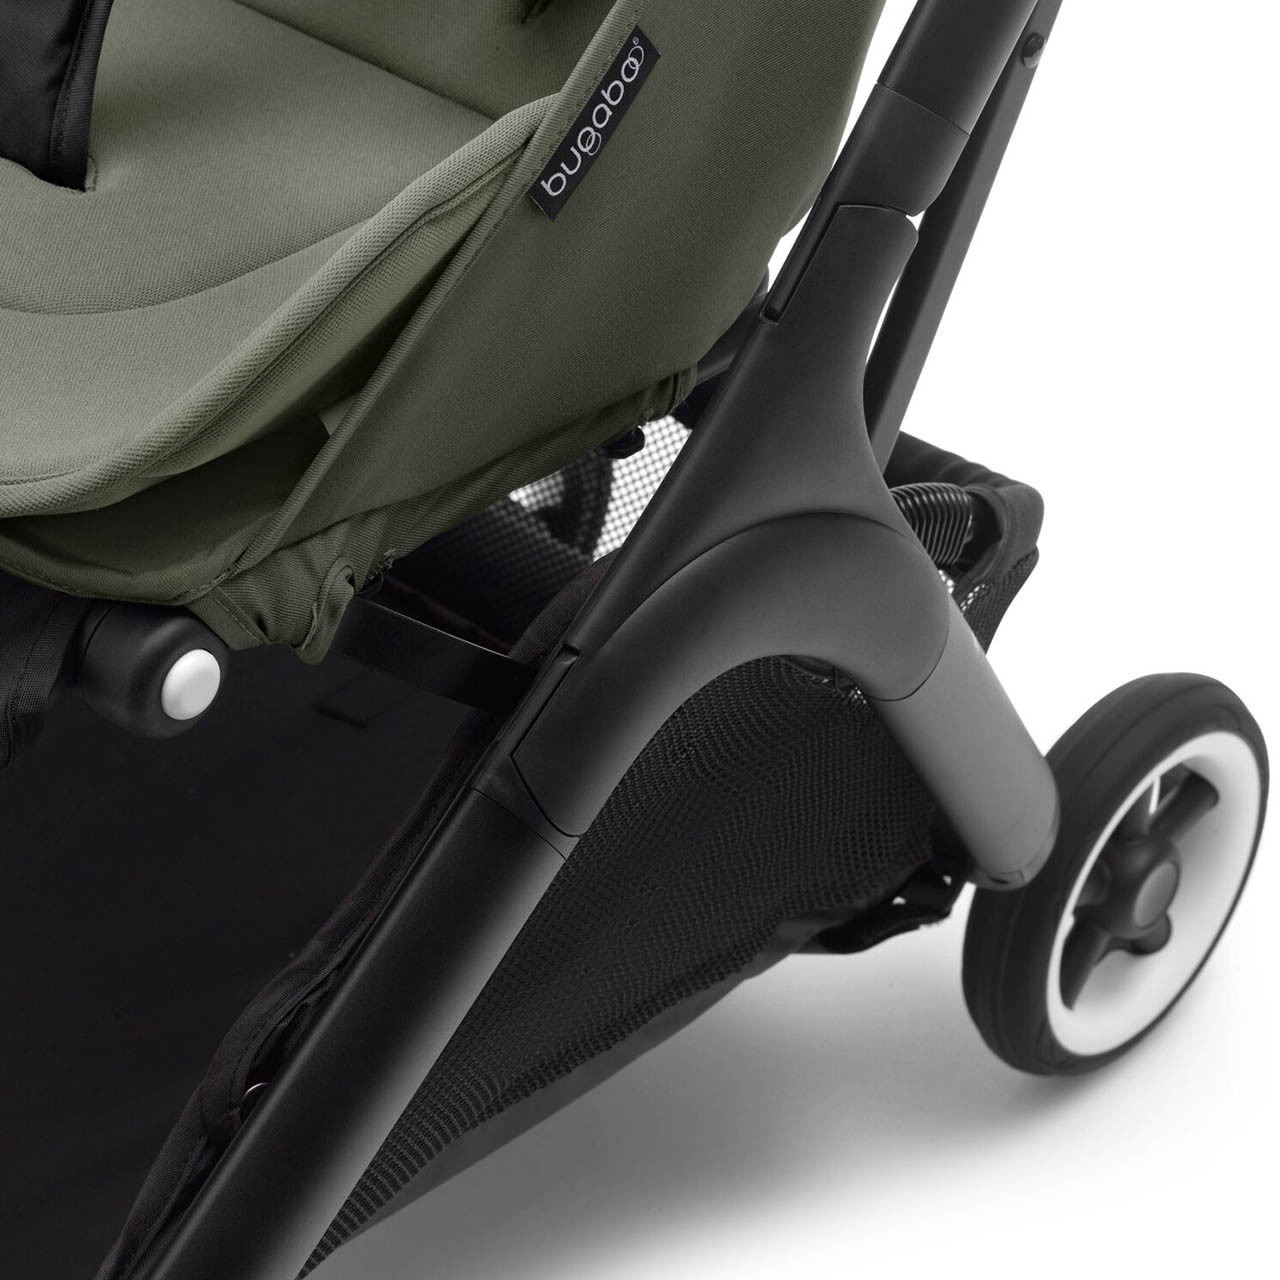 Bugaboo Butterfly Stroller Cloud T Travel System - Forest Green